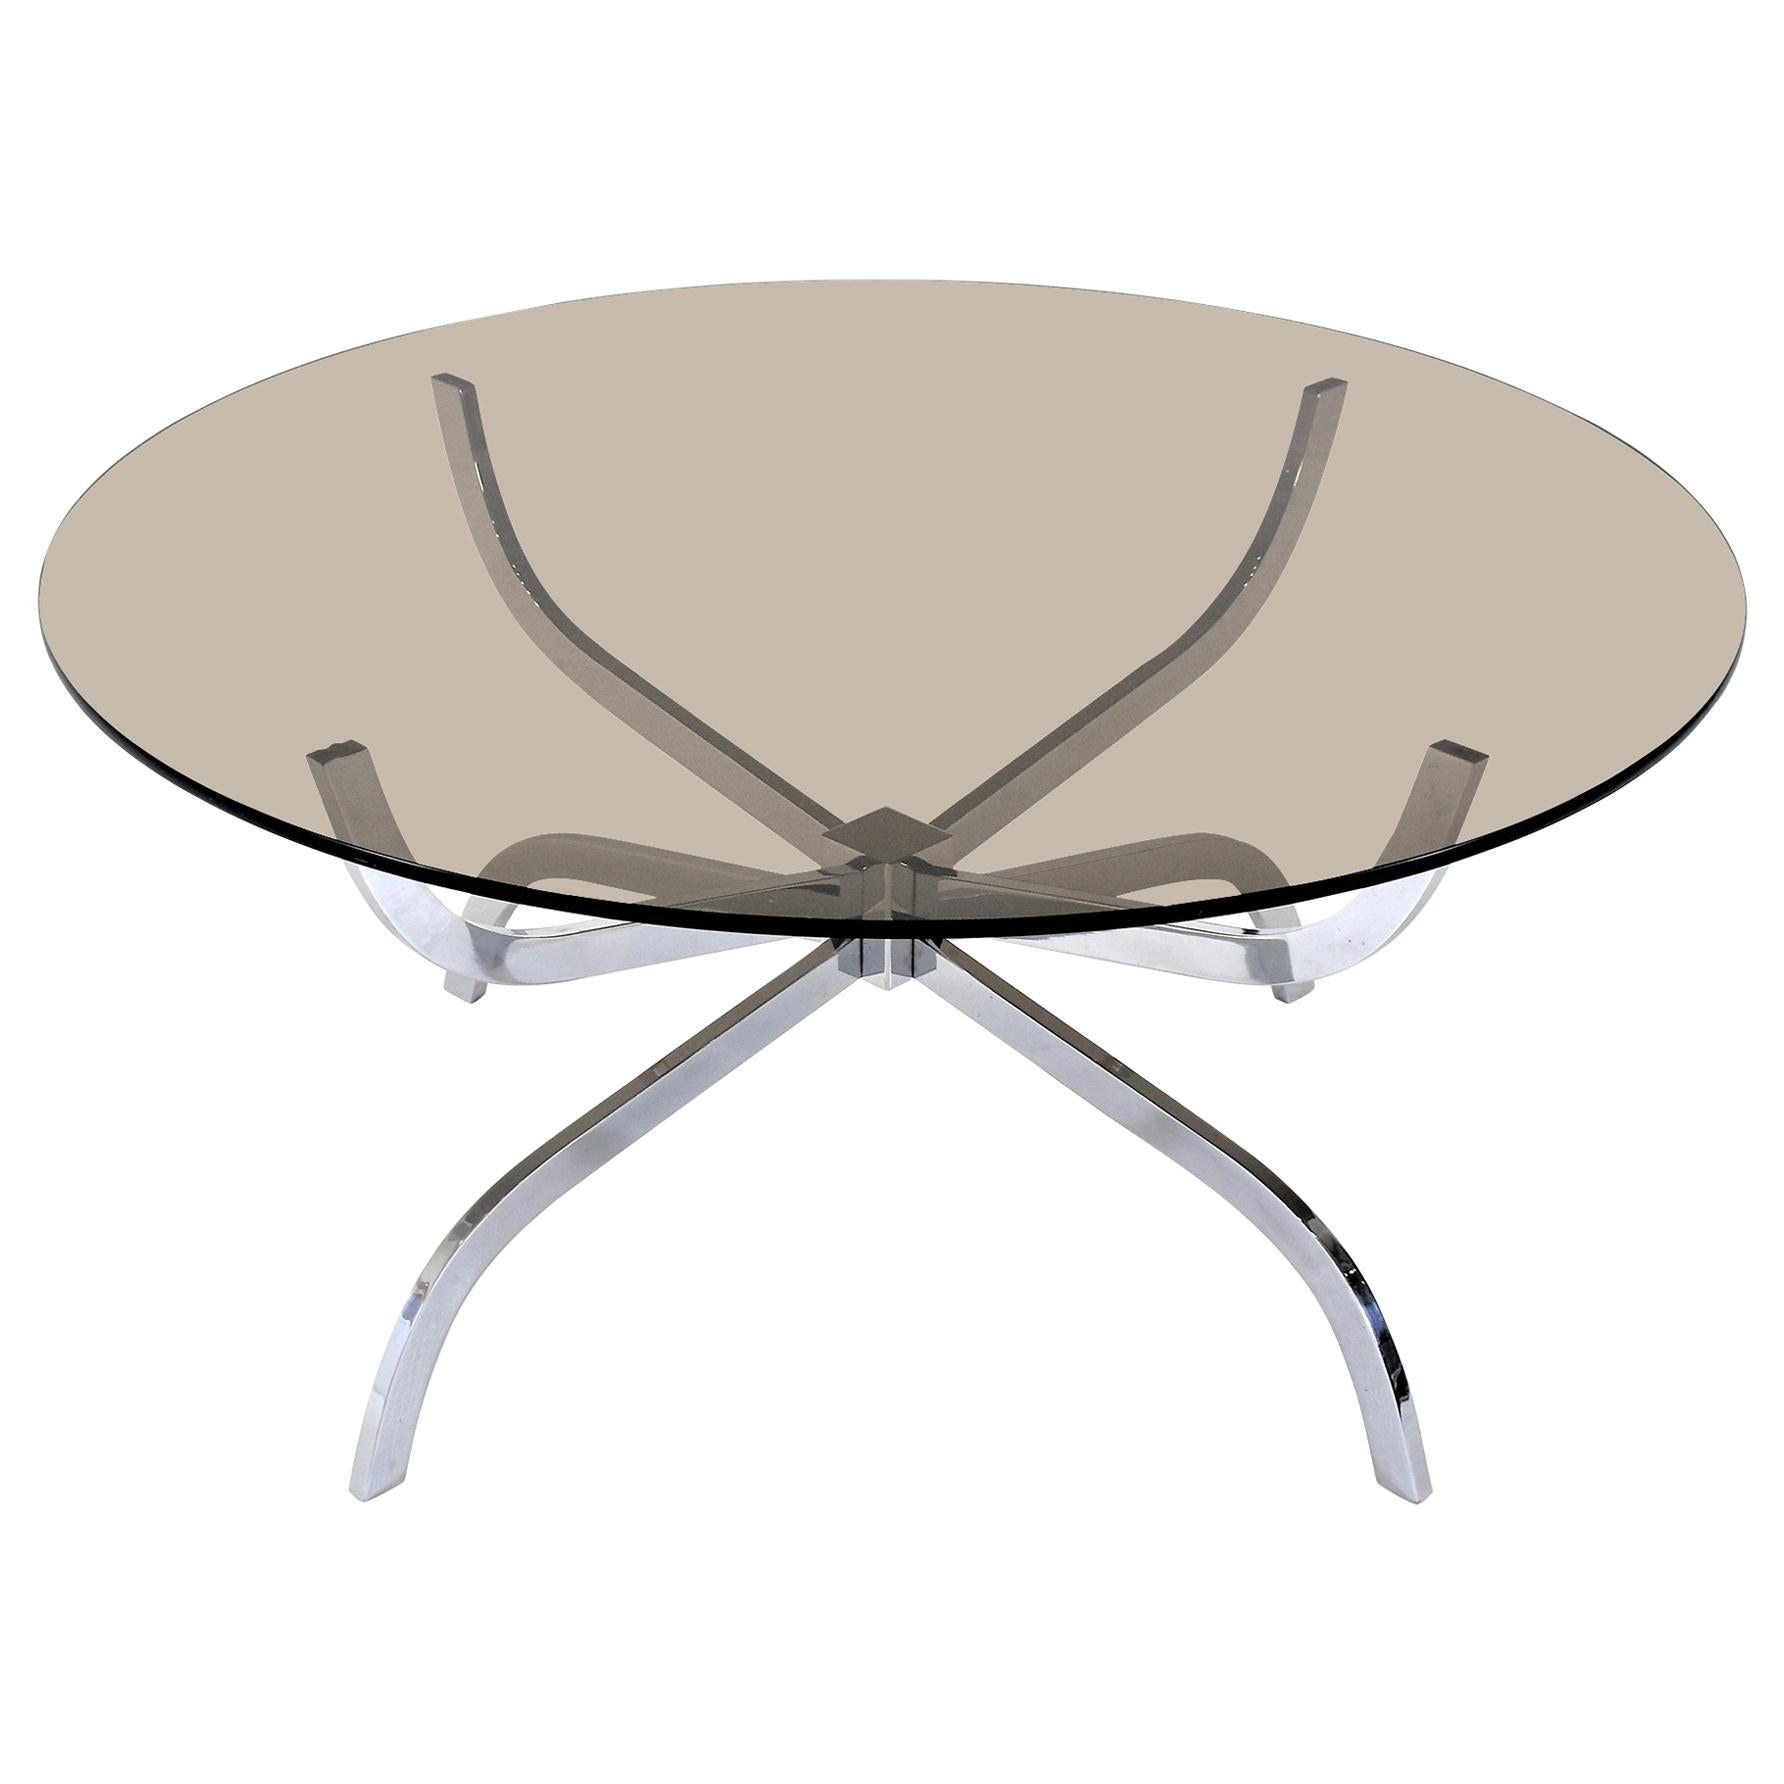 Midcentury Belgo Chrome Round "Spider" Coffeetable with Smoked Glasstop, 1970s For Sale